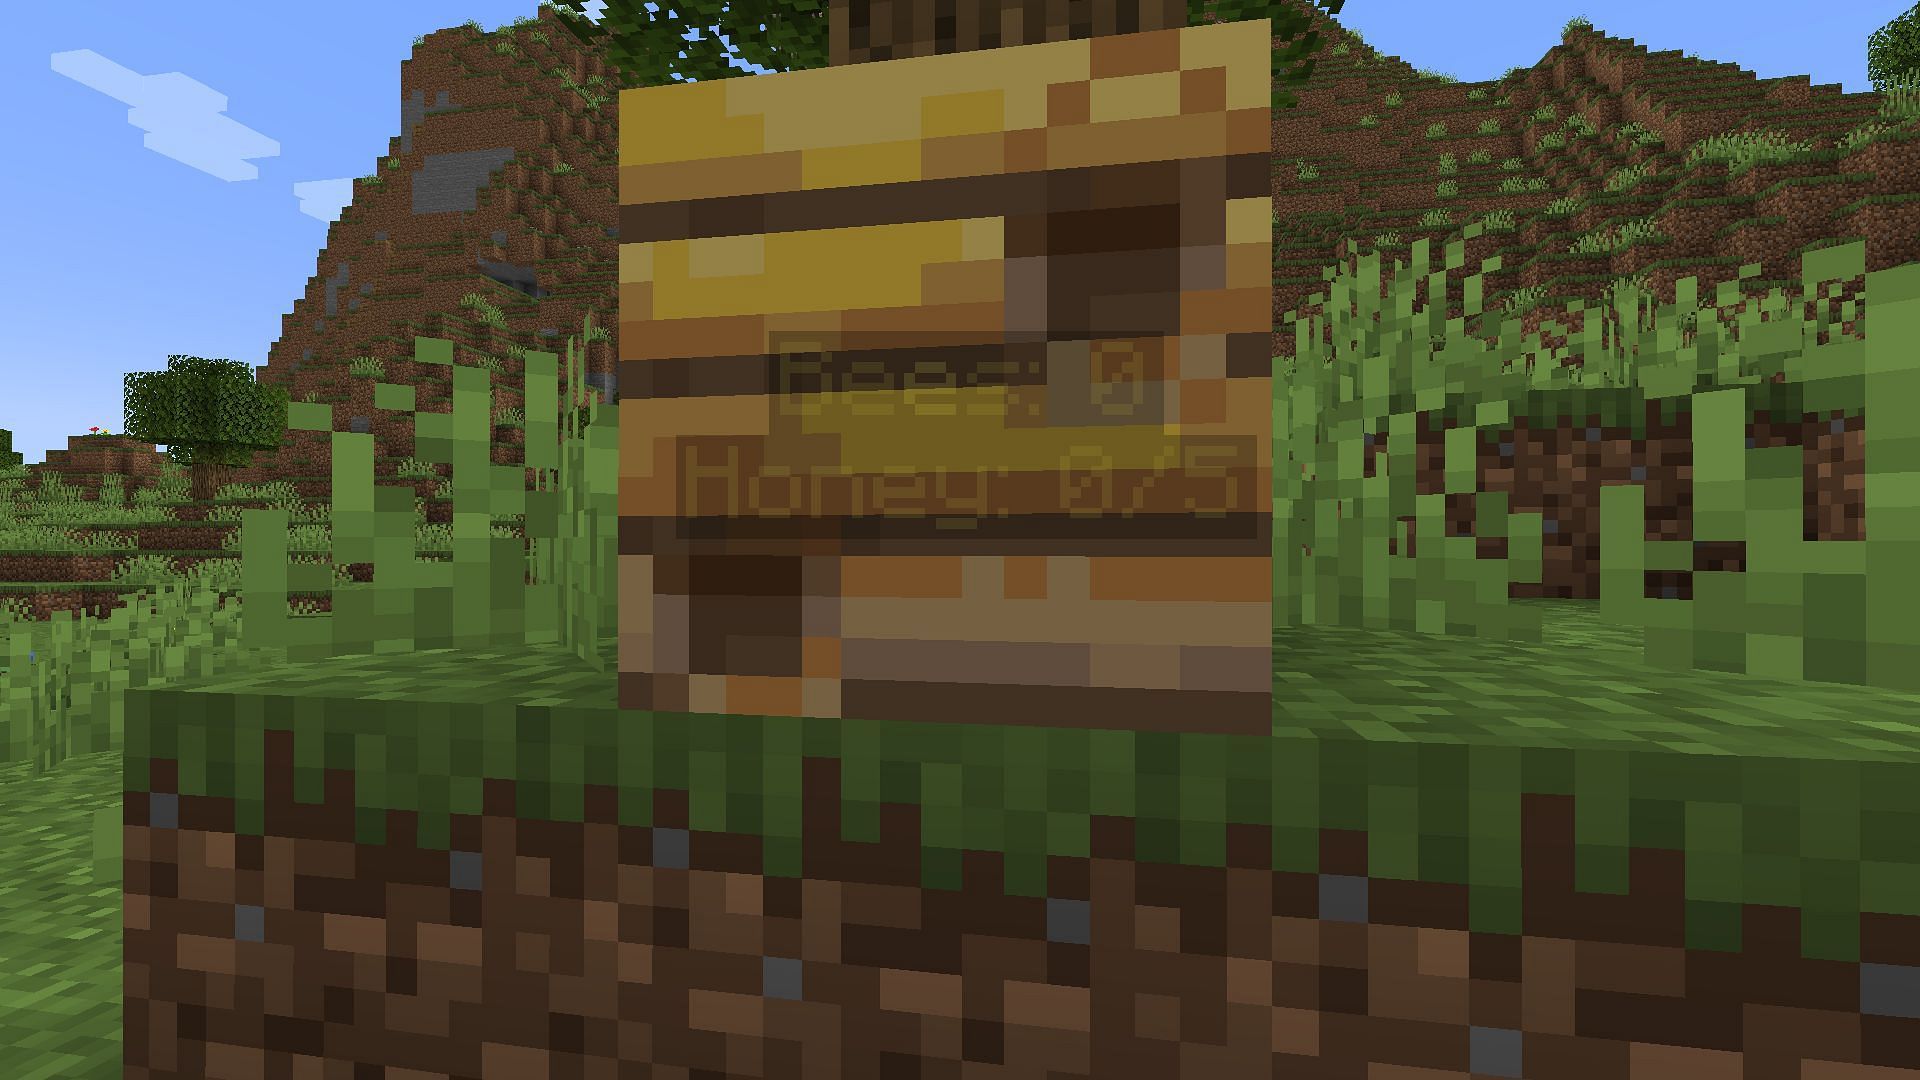 The bee count and honey count for this hive (Image via Mojang)